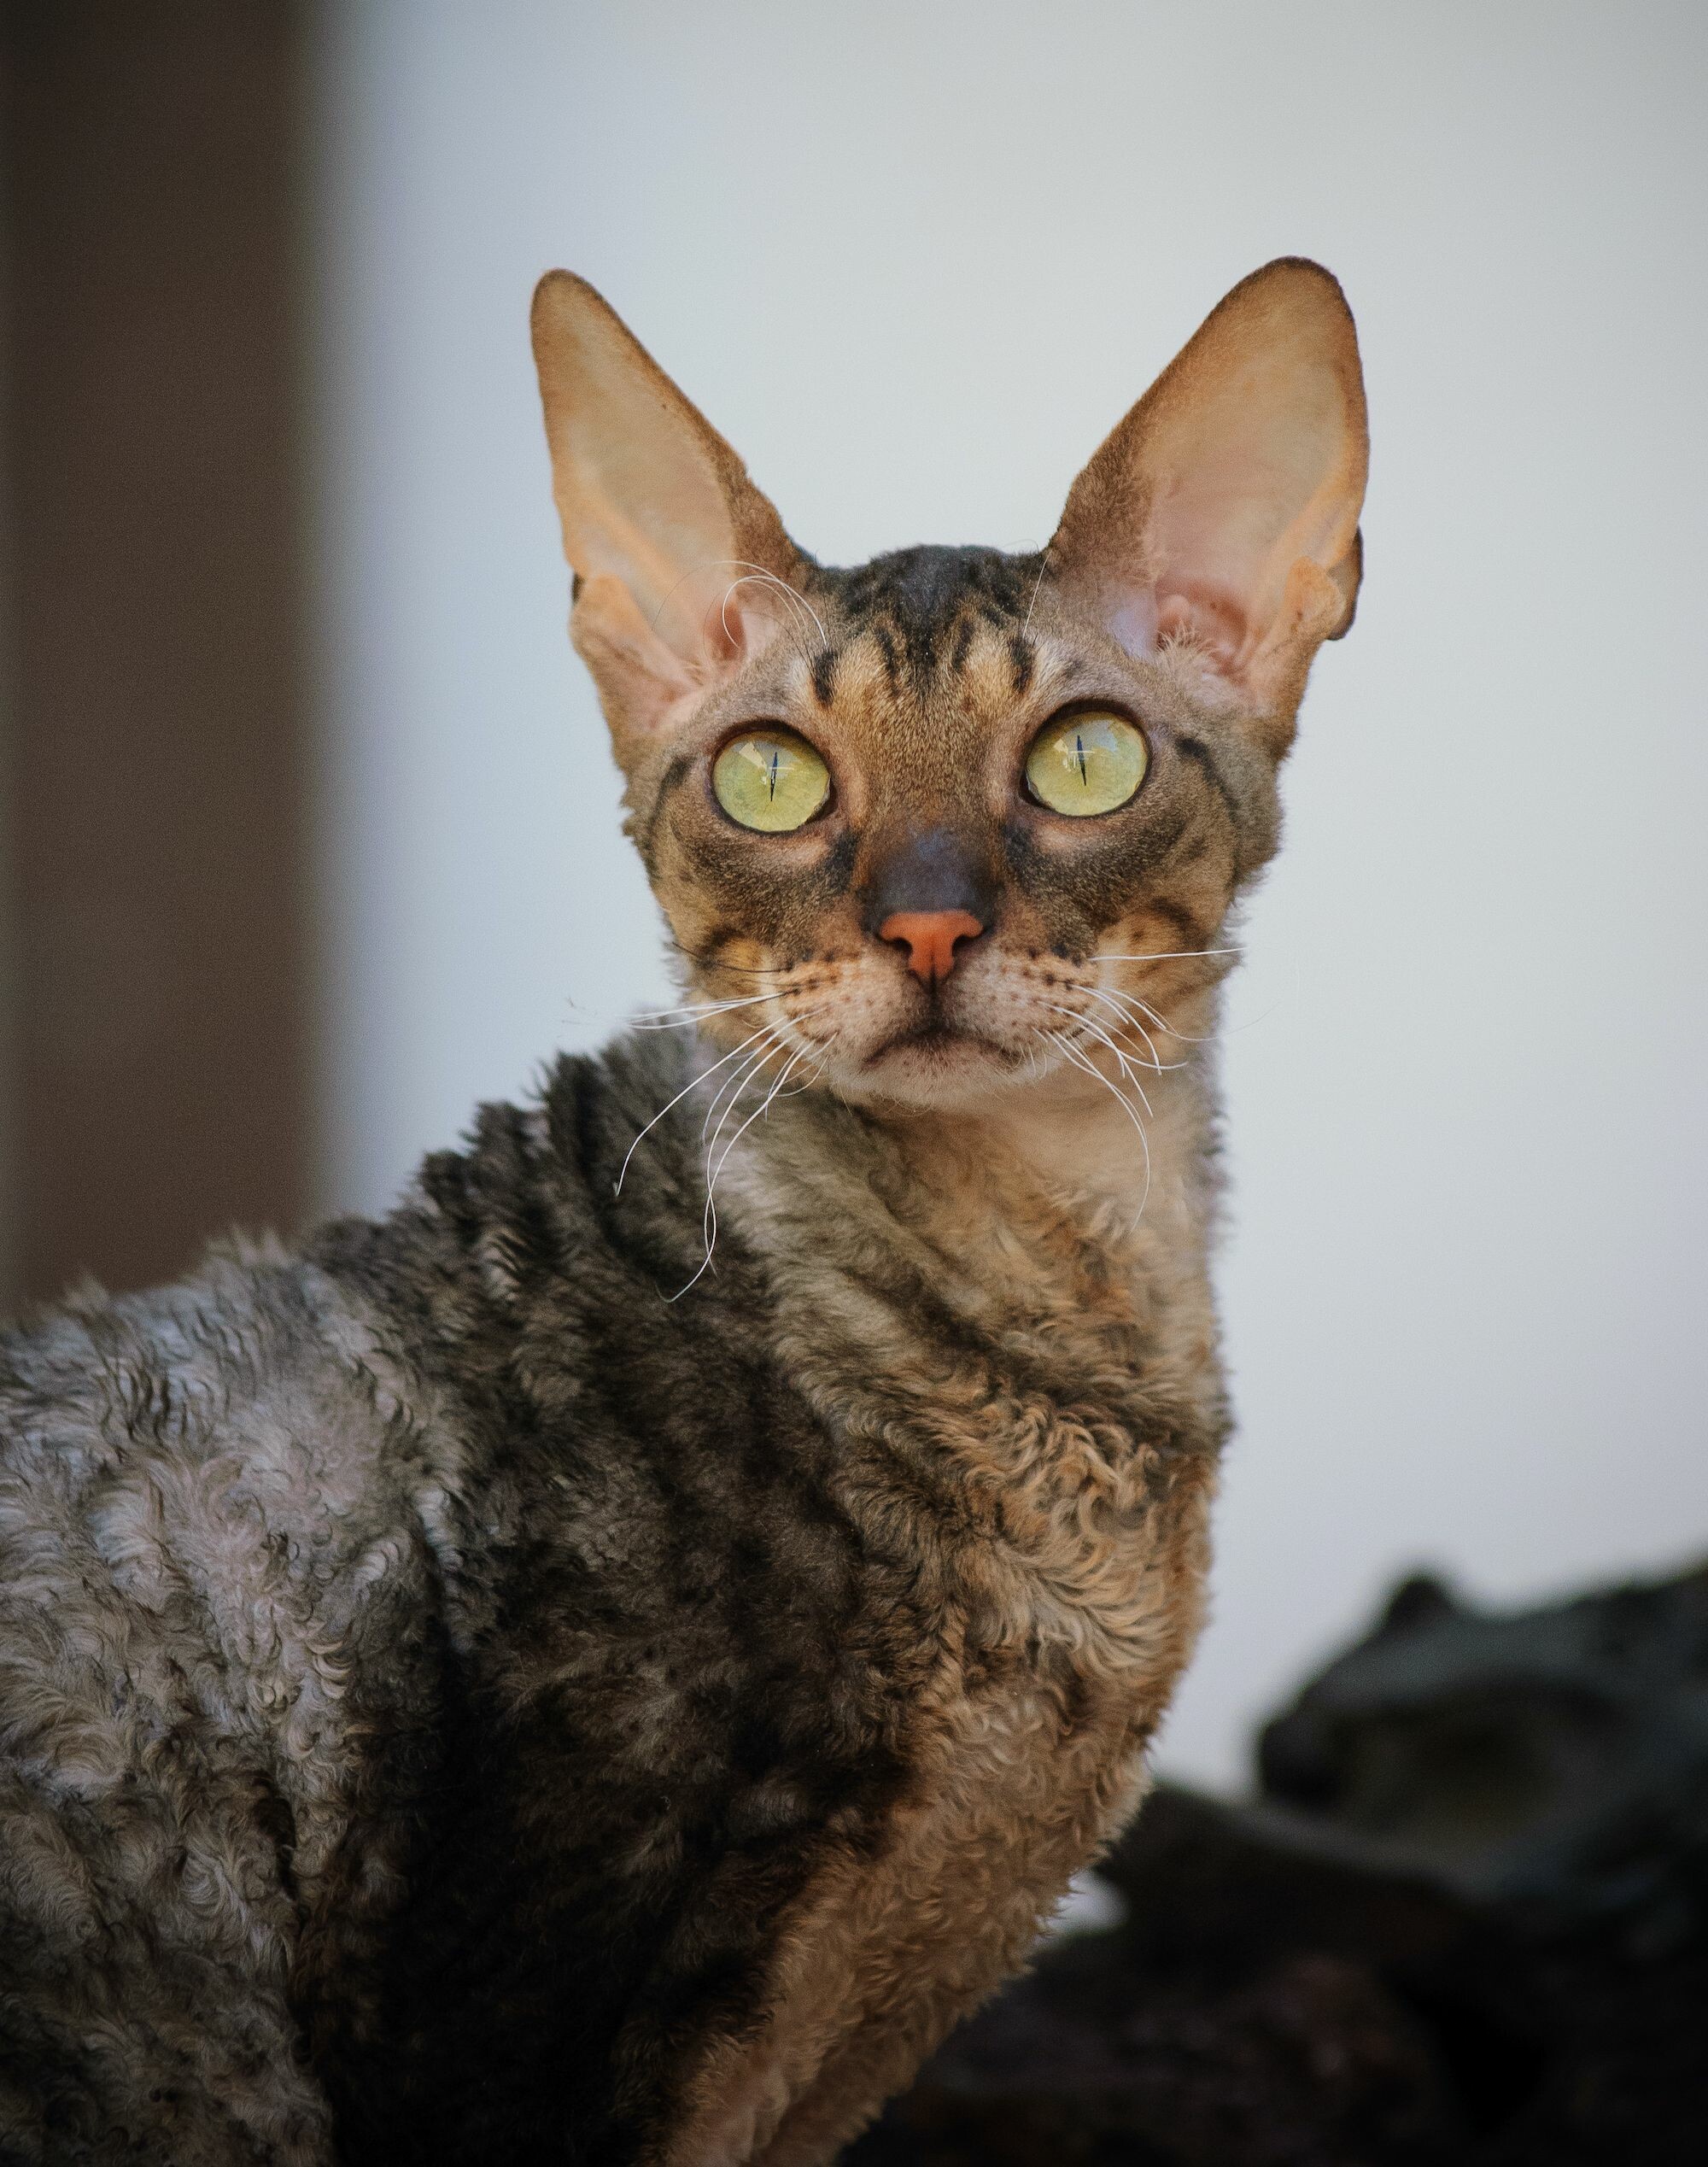 Devon Rex: Known for its slender body, wavy coat, and large ears, Cat. 2000x2540 HD Wallpaper.